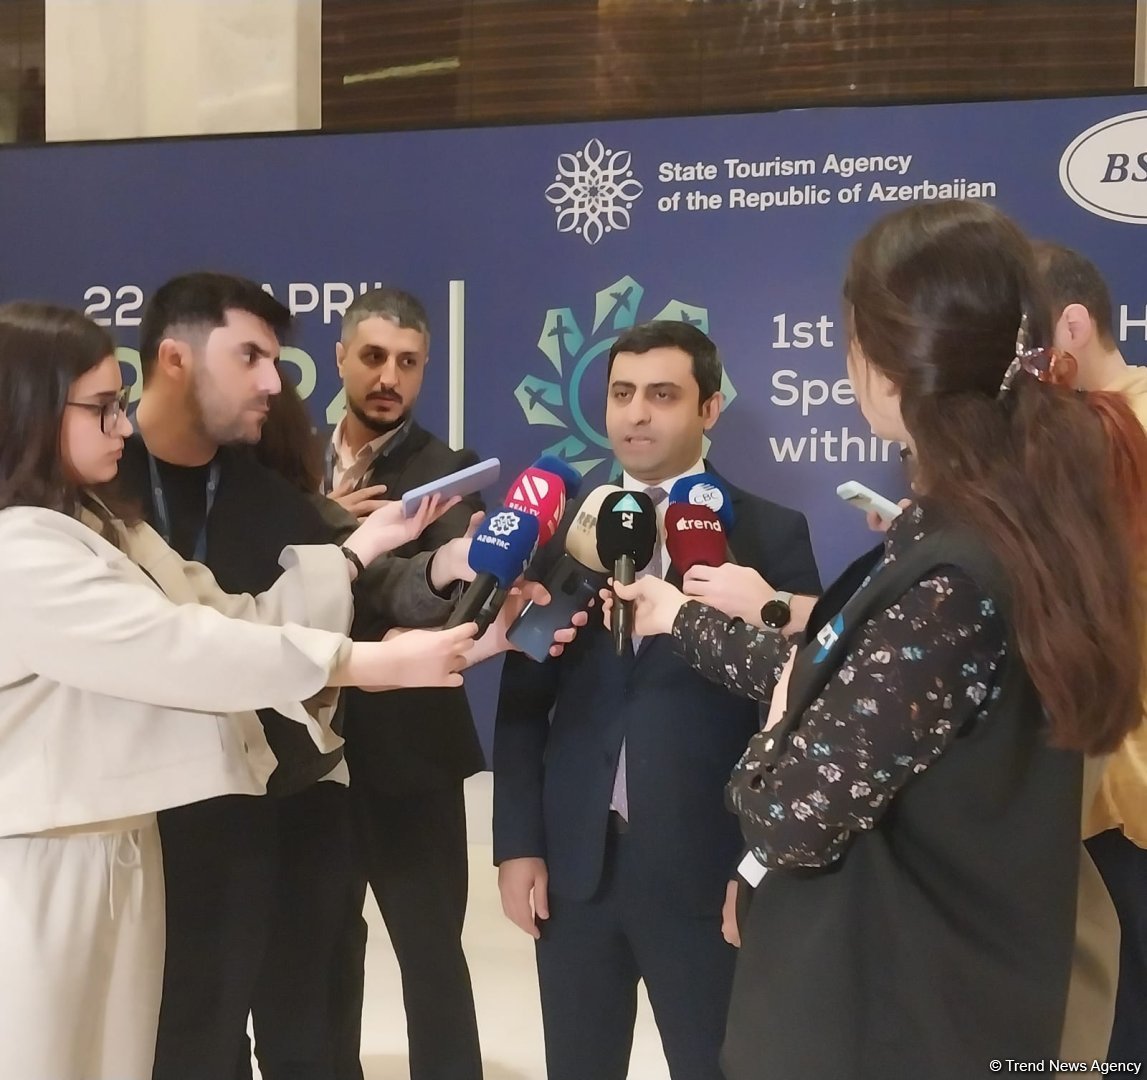 Azerbaijani regions carry out efforts to develop tourism sector - state agency